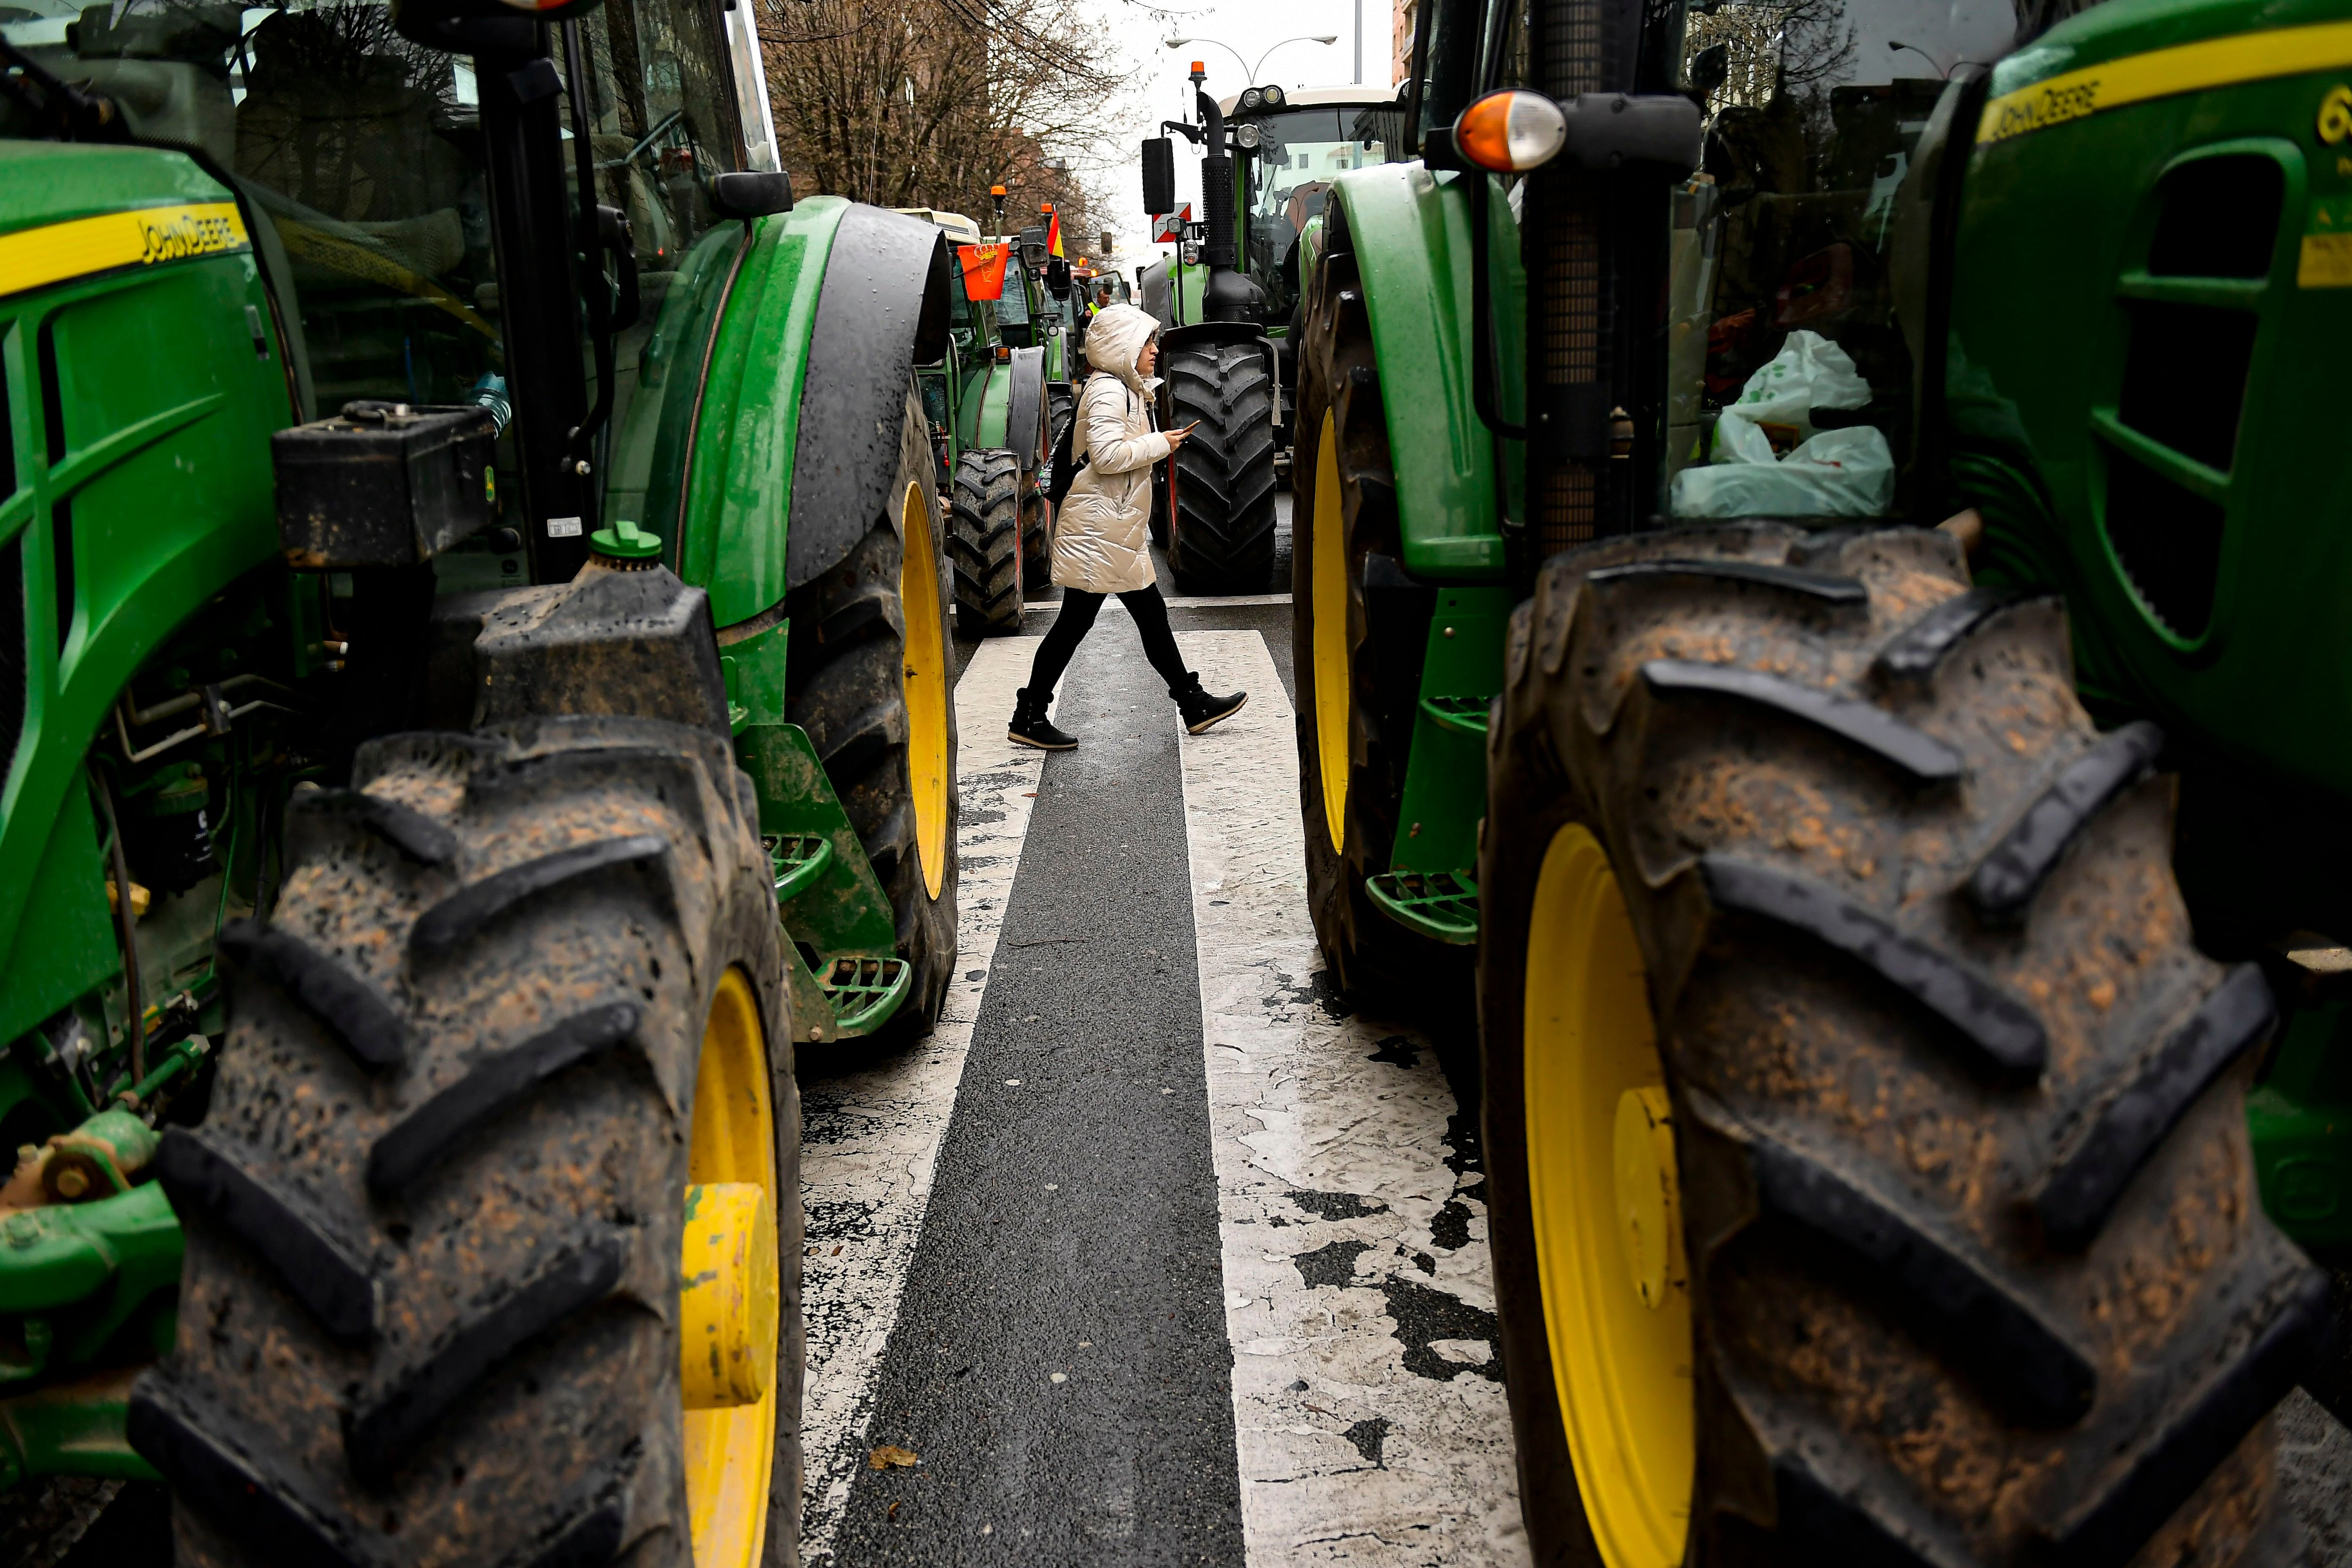 A pedestrian crosses a street between tractors in the center of the city while taking part in a protest, in Pamplona, northern Spain, Thursday, Feb. 8, 2024. For three non stop days farmers across Spain have staged tractor protests across the country, blocking highways and causing traffic jams to demand  changes in European Union policies and funds and measures to combat production cost hikes. (AP Photo/Alvaro Barrientos)